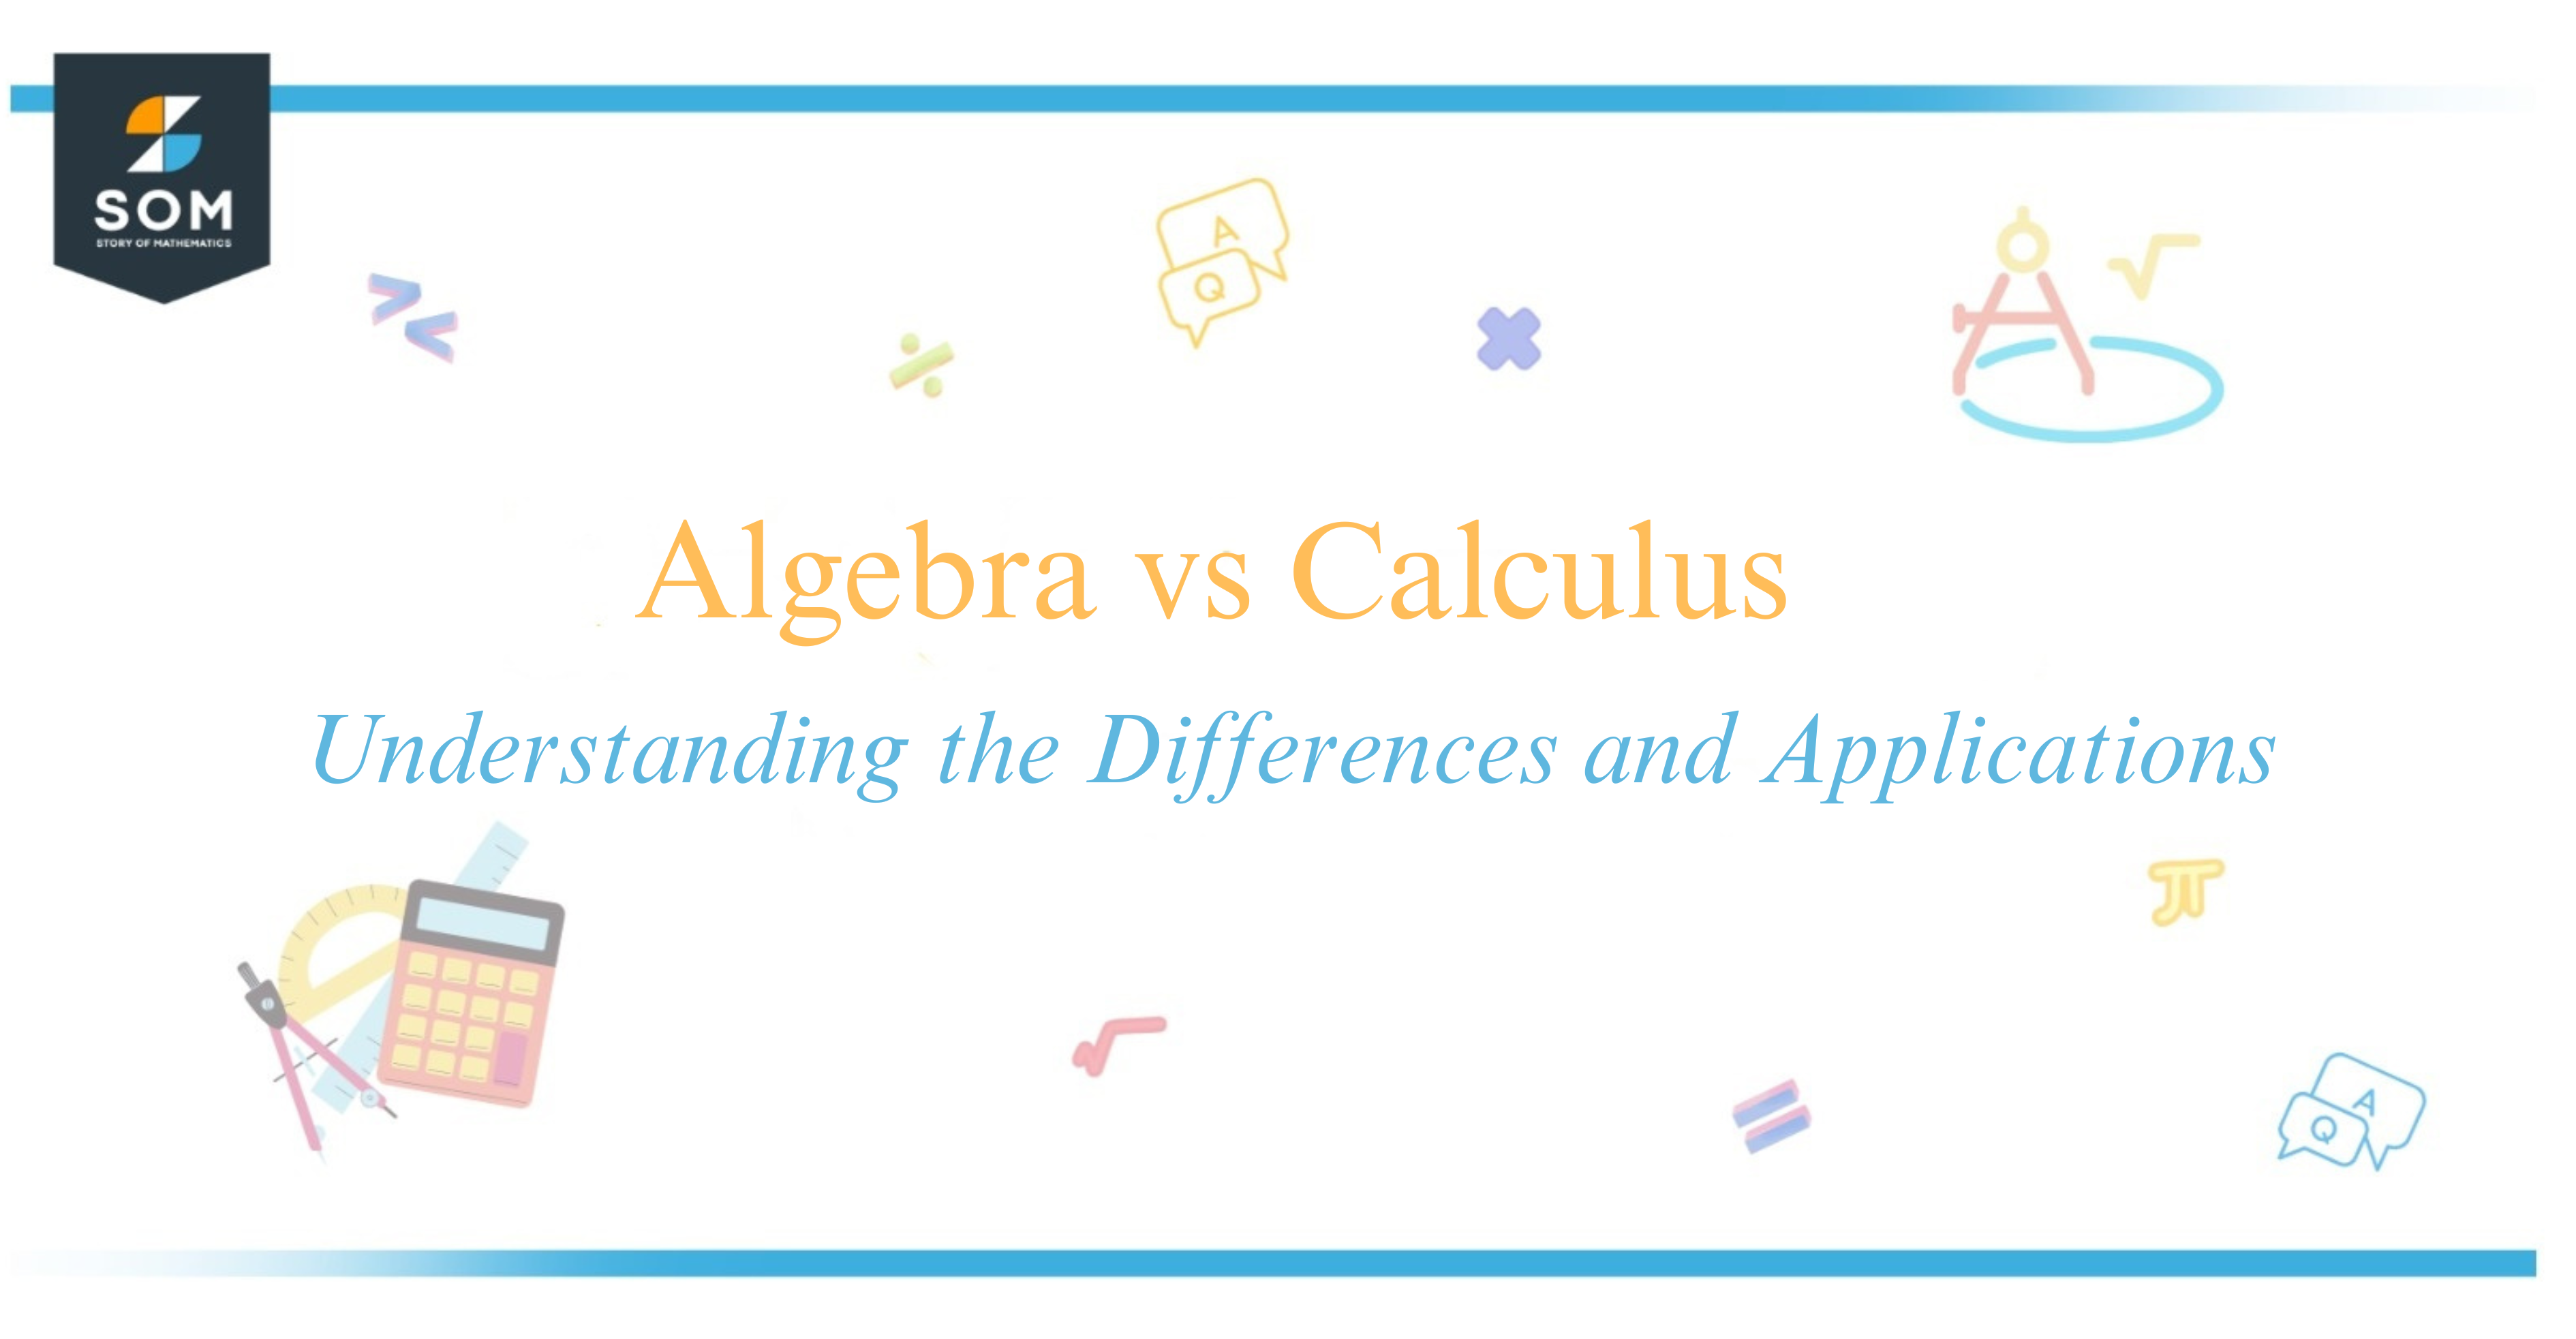 Algebra vs Calculus Understanding the Differences and Applications